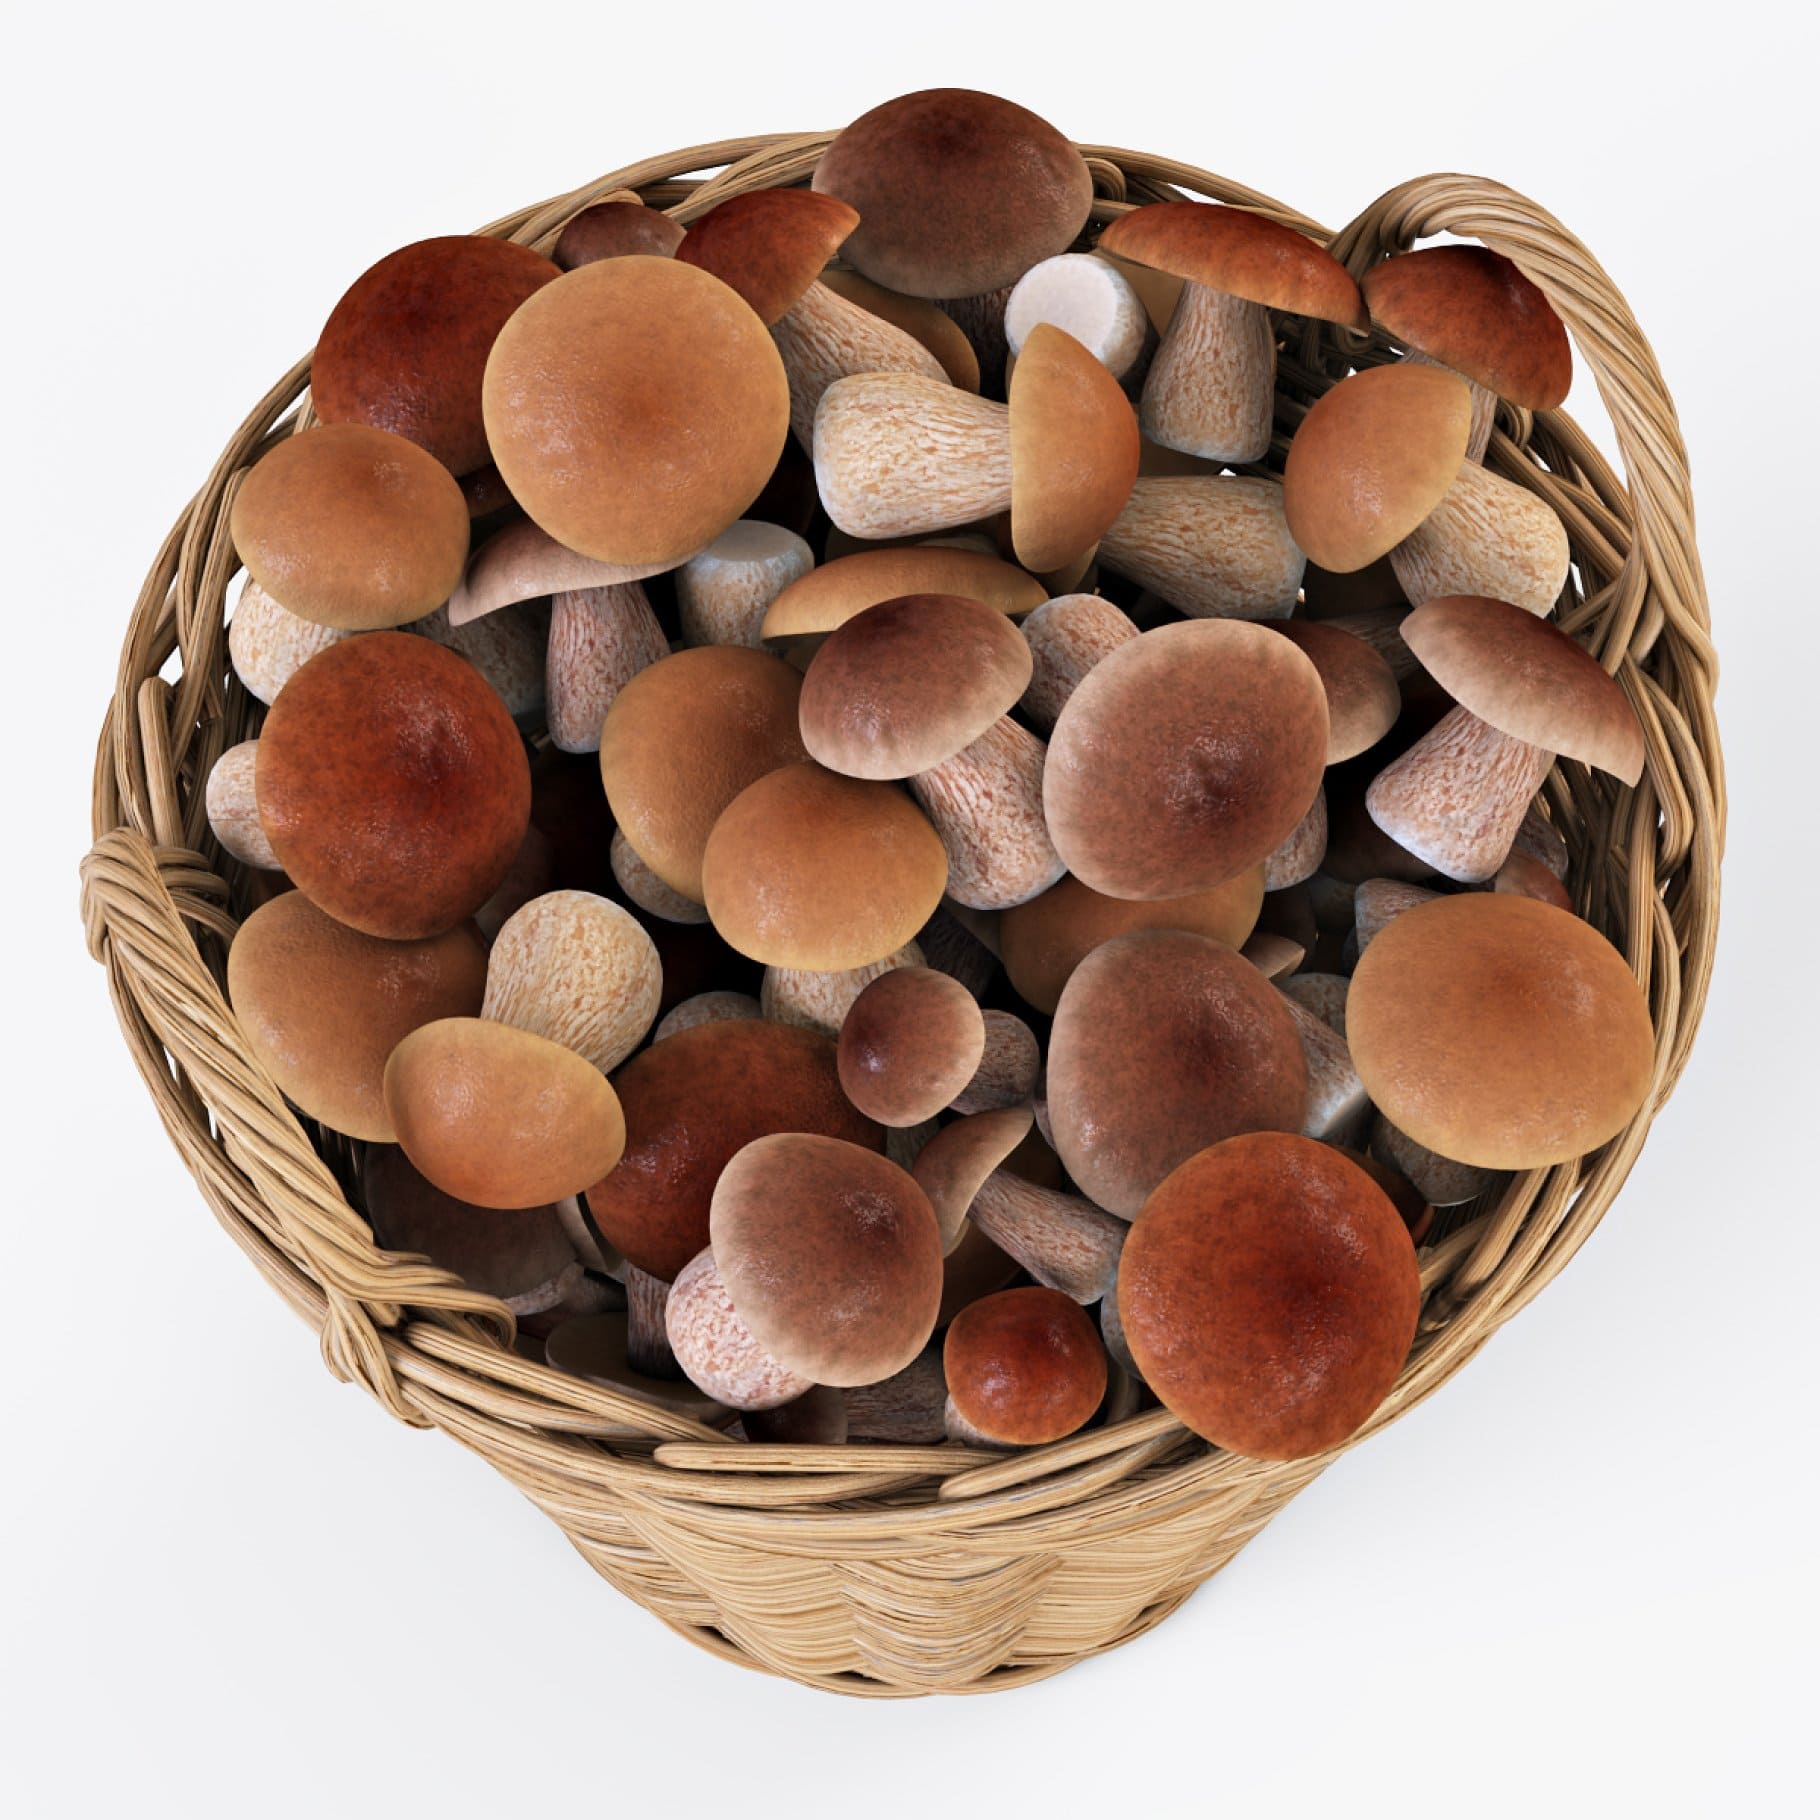 Mushrooms of different sizes in a basket.